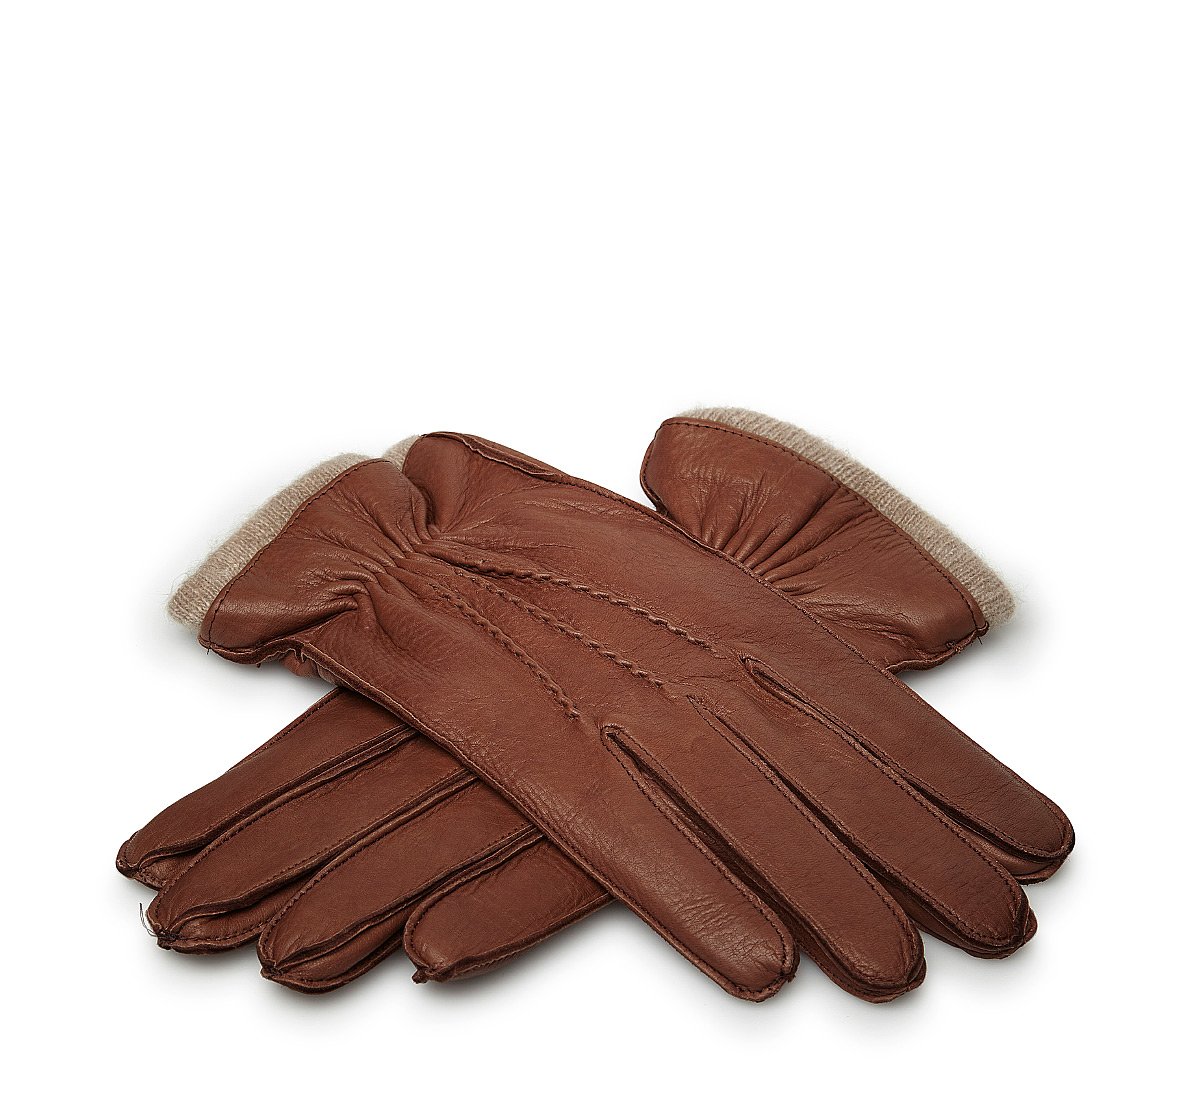 Leather gloves with jersey cuffs